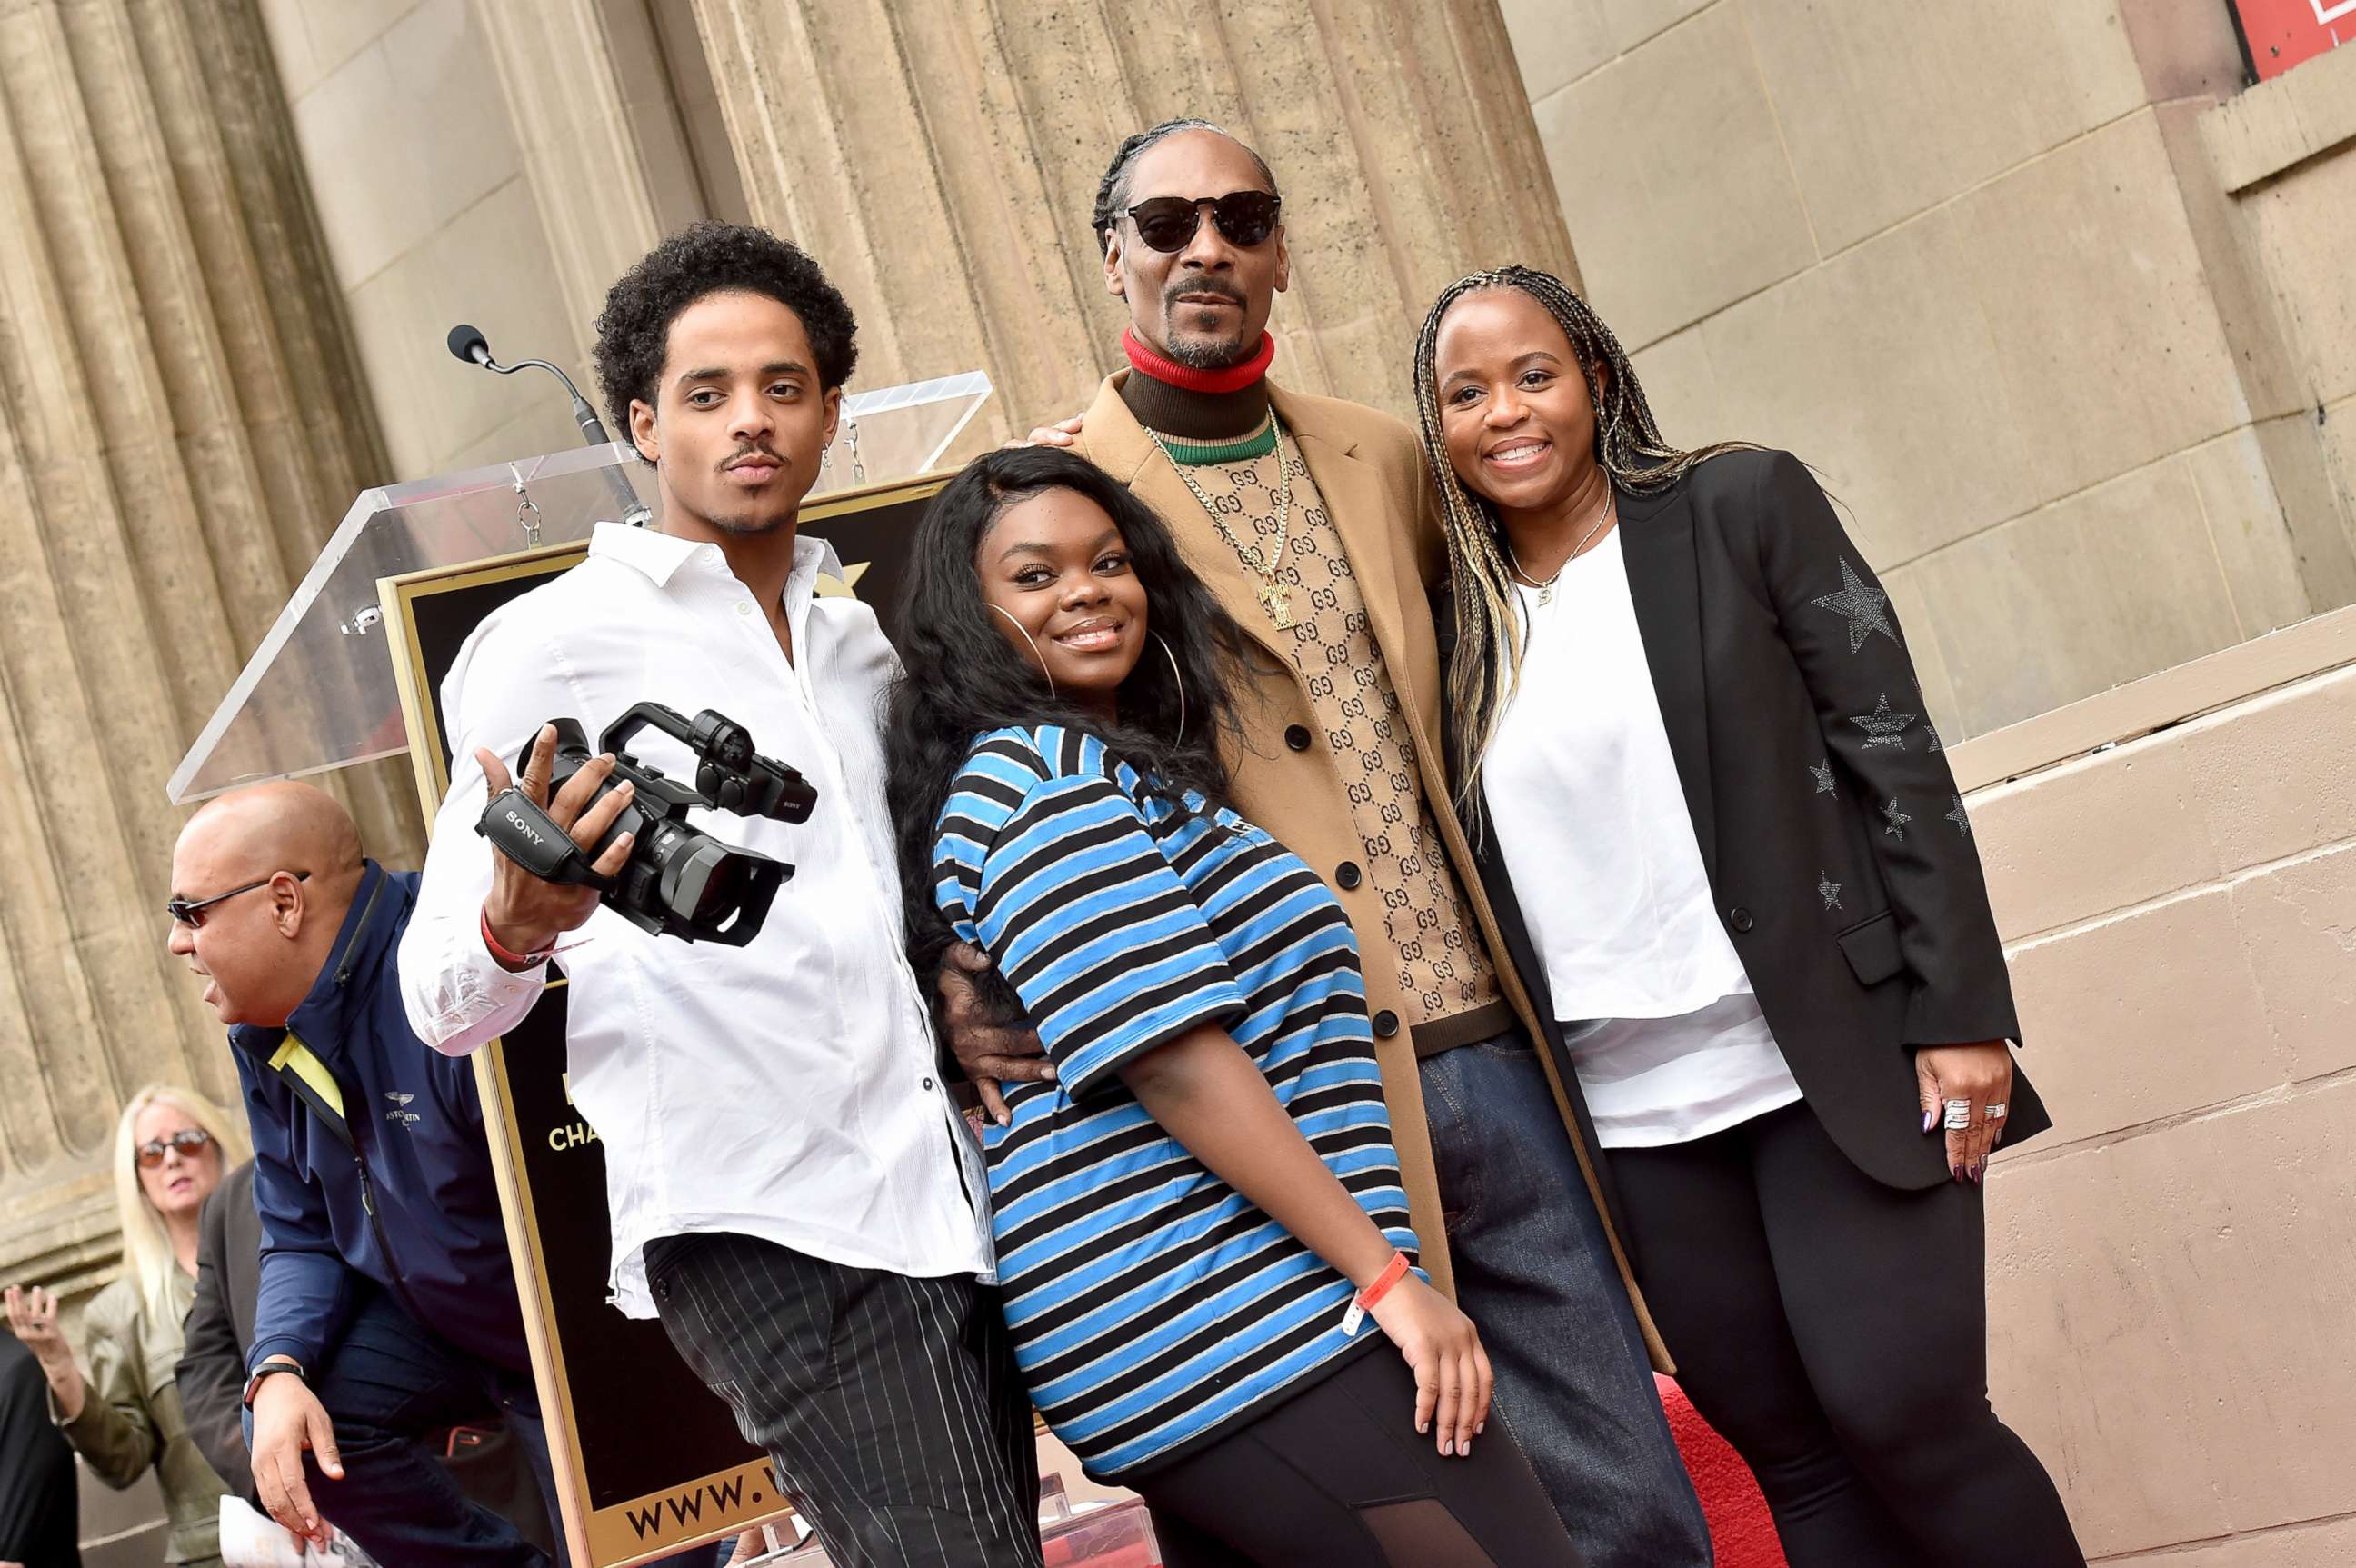 PHOTO: Snoop Dogg, Shante Broadus, Cori Broadus and Cordell Broadus on the Hollywood Walk of Fame on Nov. 19, 2018 in Hollywood, Calif.